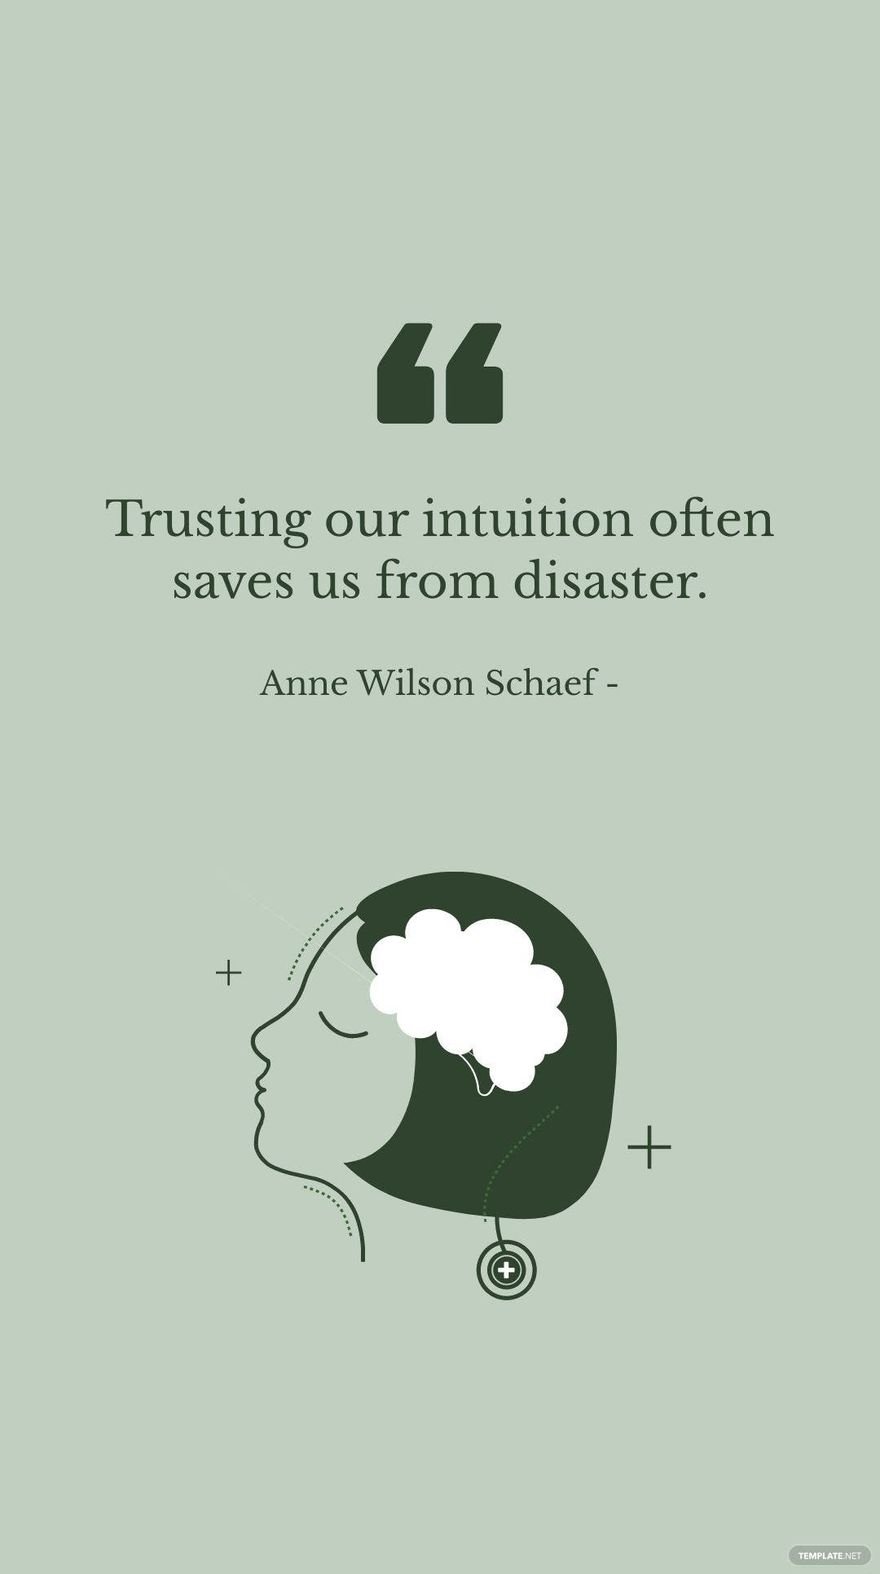 Anne Wilson Schaef - Trusting our intuition often saves us from disaster.